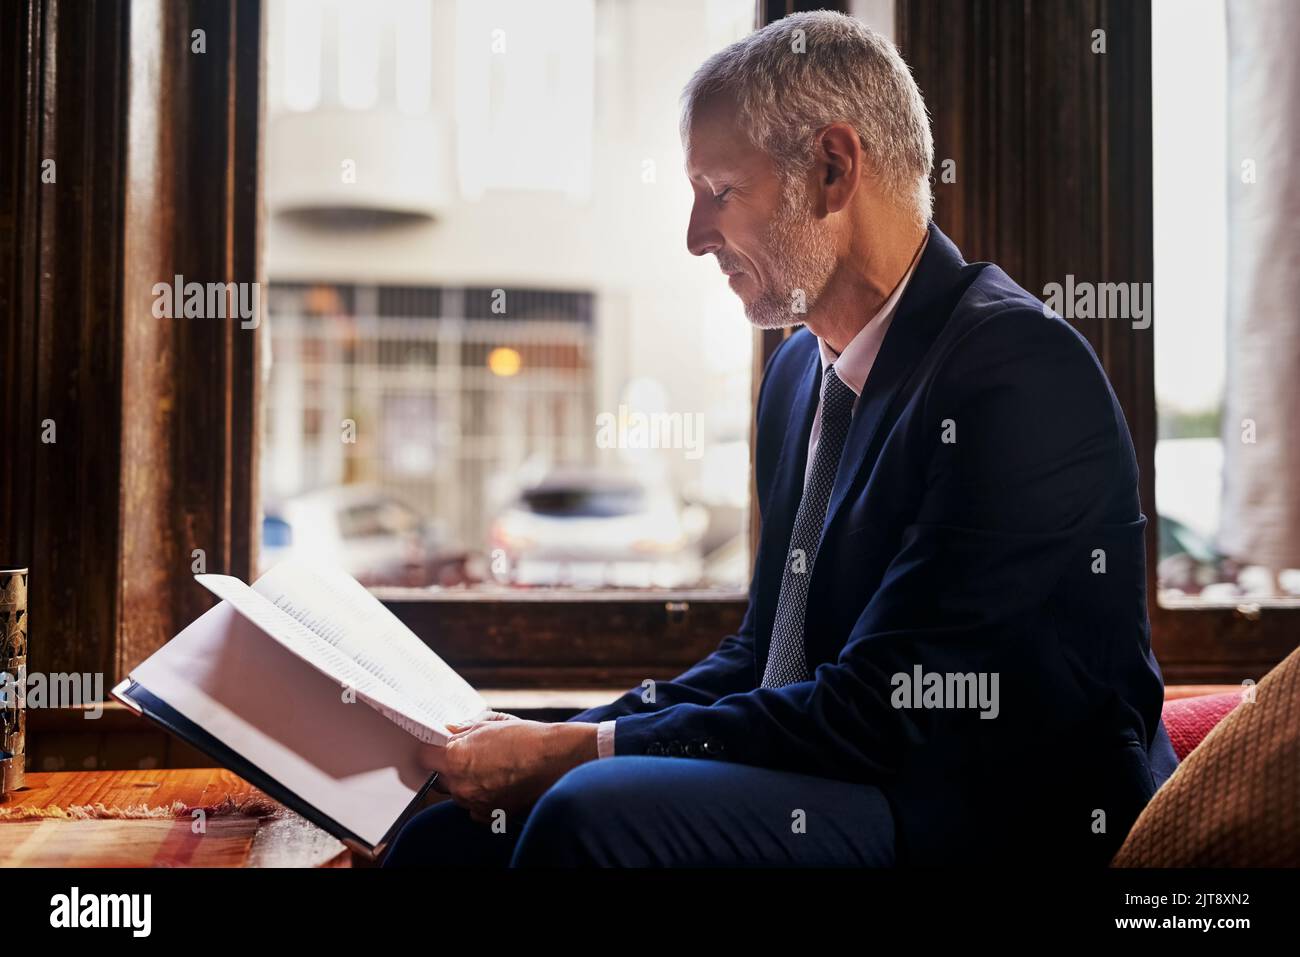 Relaxing at his favorite city spot. a well-dressed mature man reading a menu in a cafe after work. Stock Photo